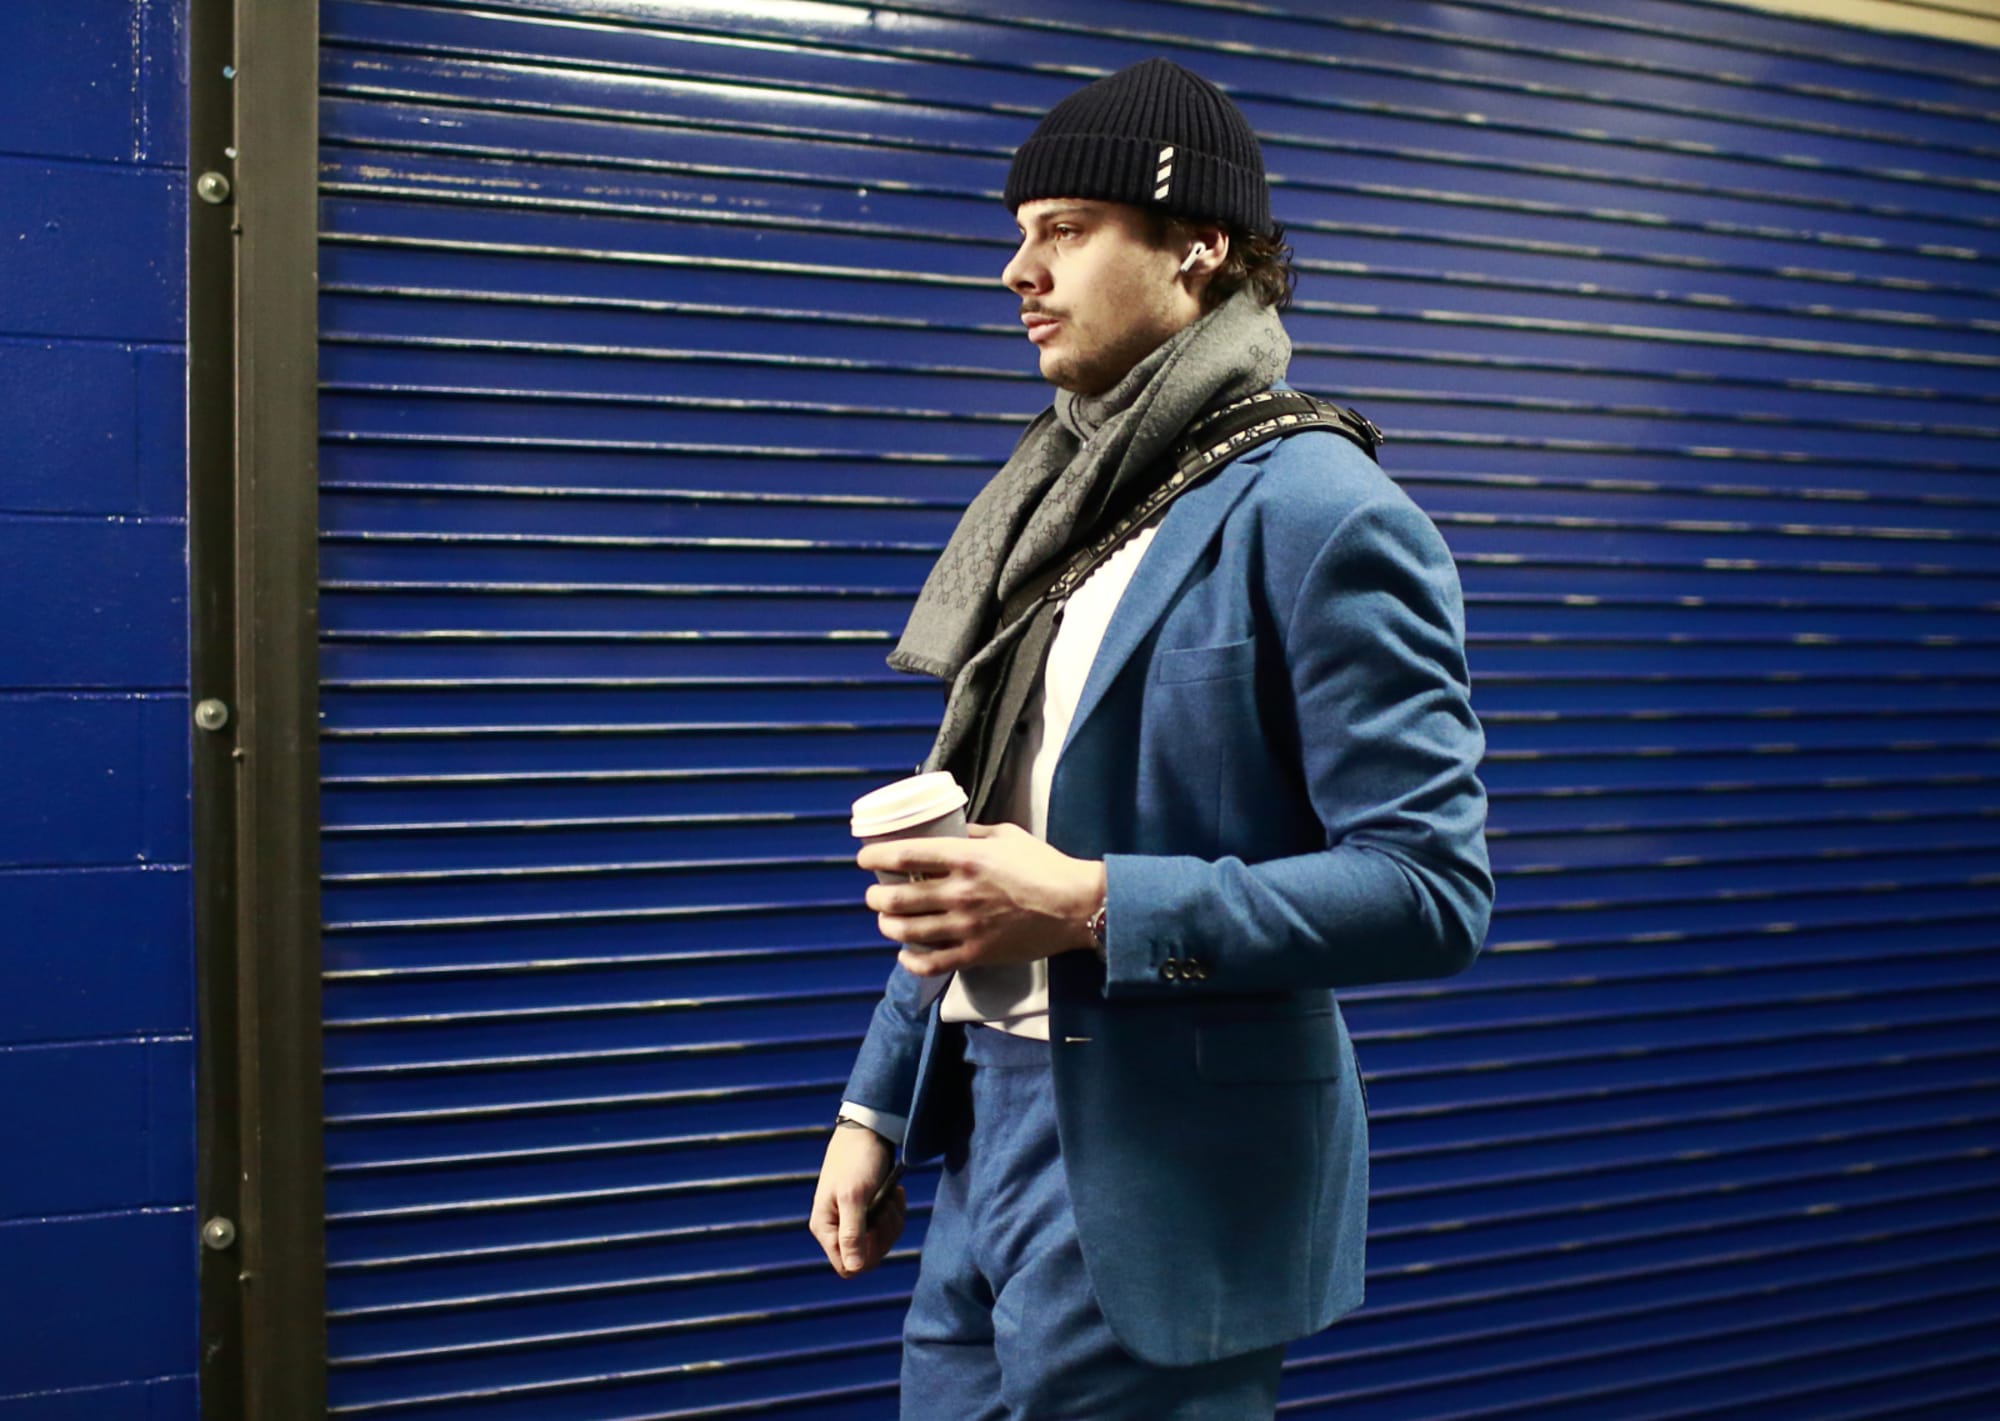 It's Time to Appreciate the Toronto Maple Leafs Fashion Trends